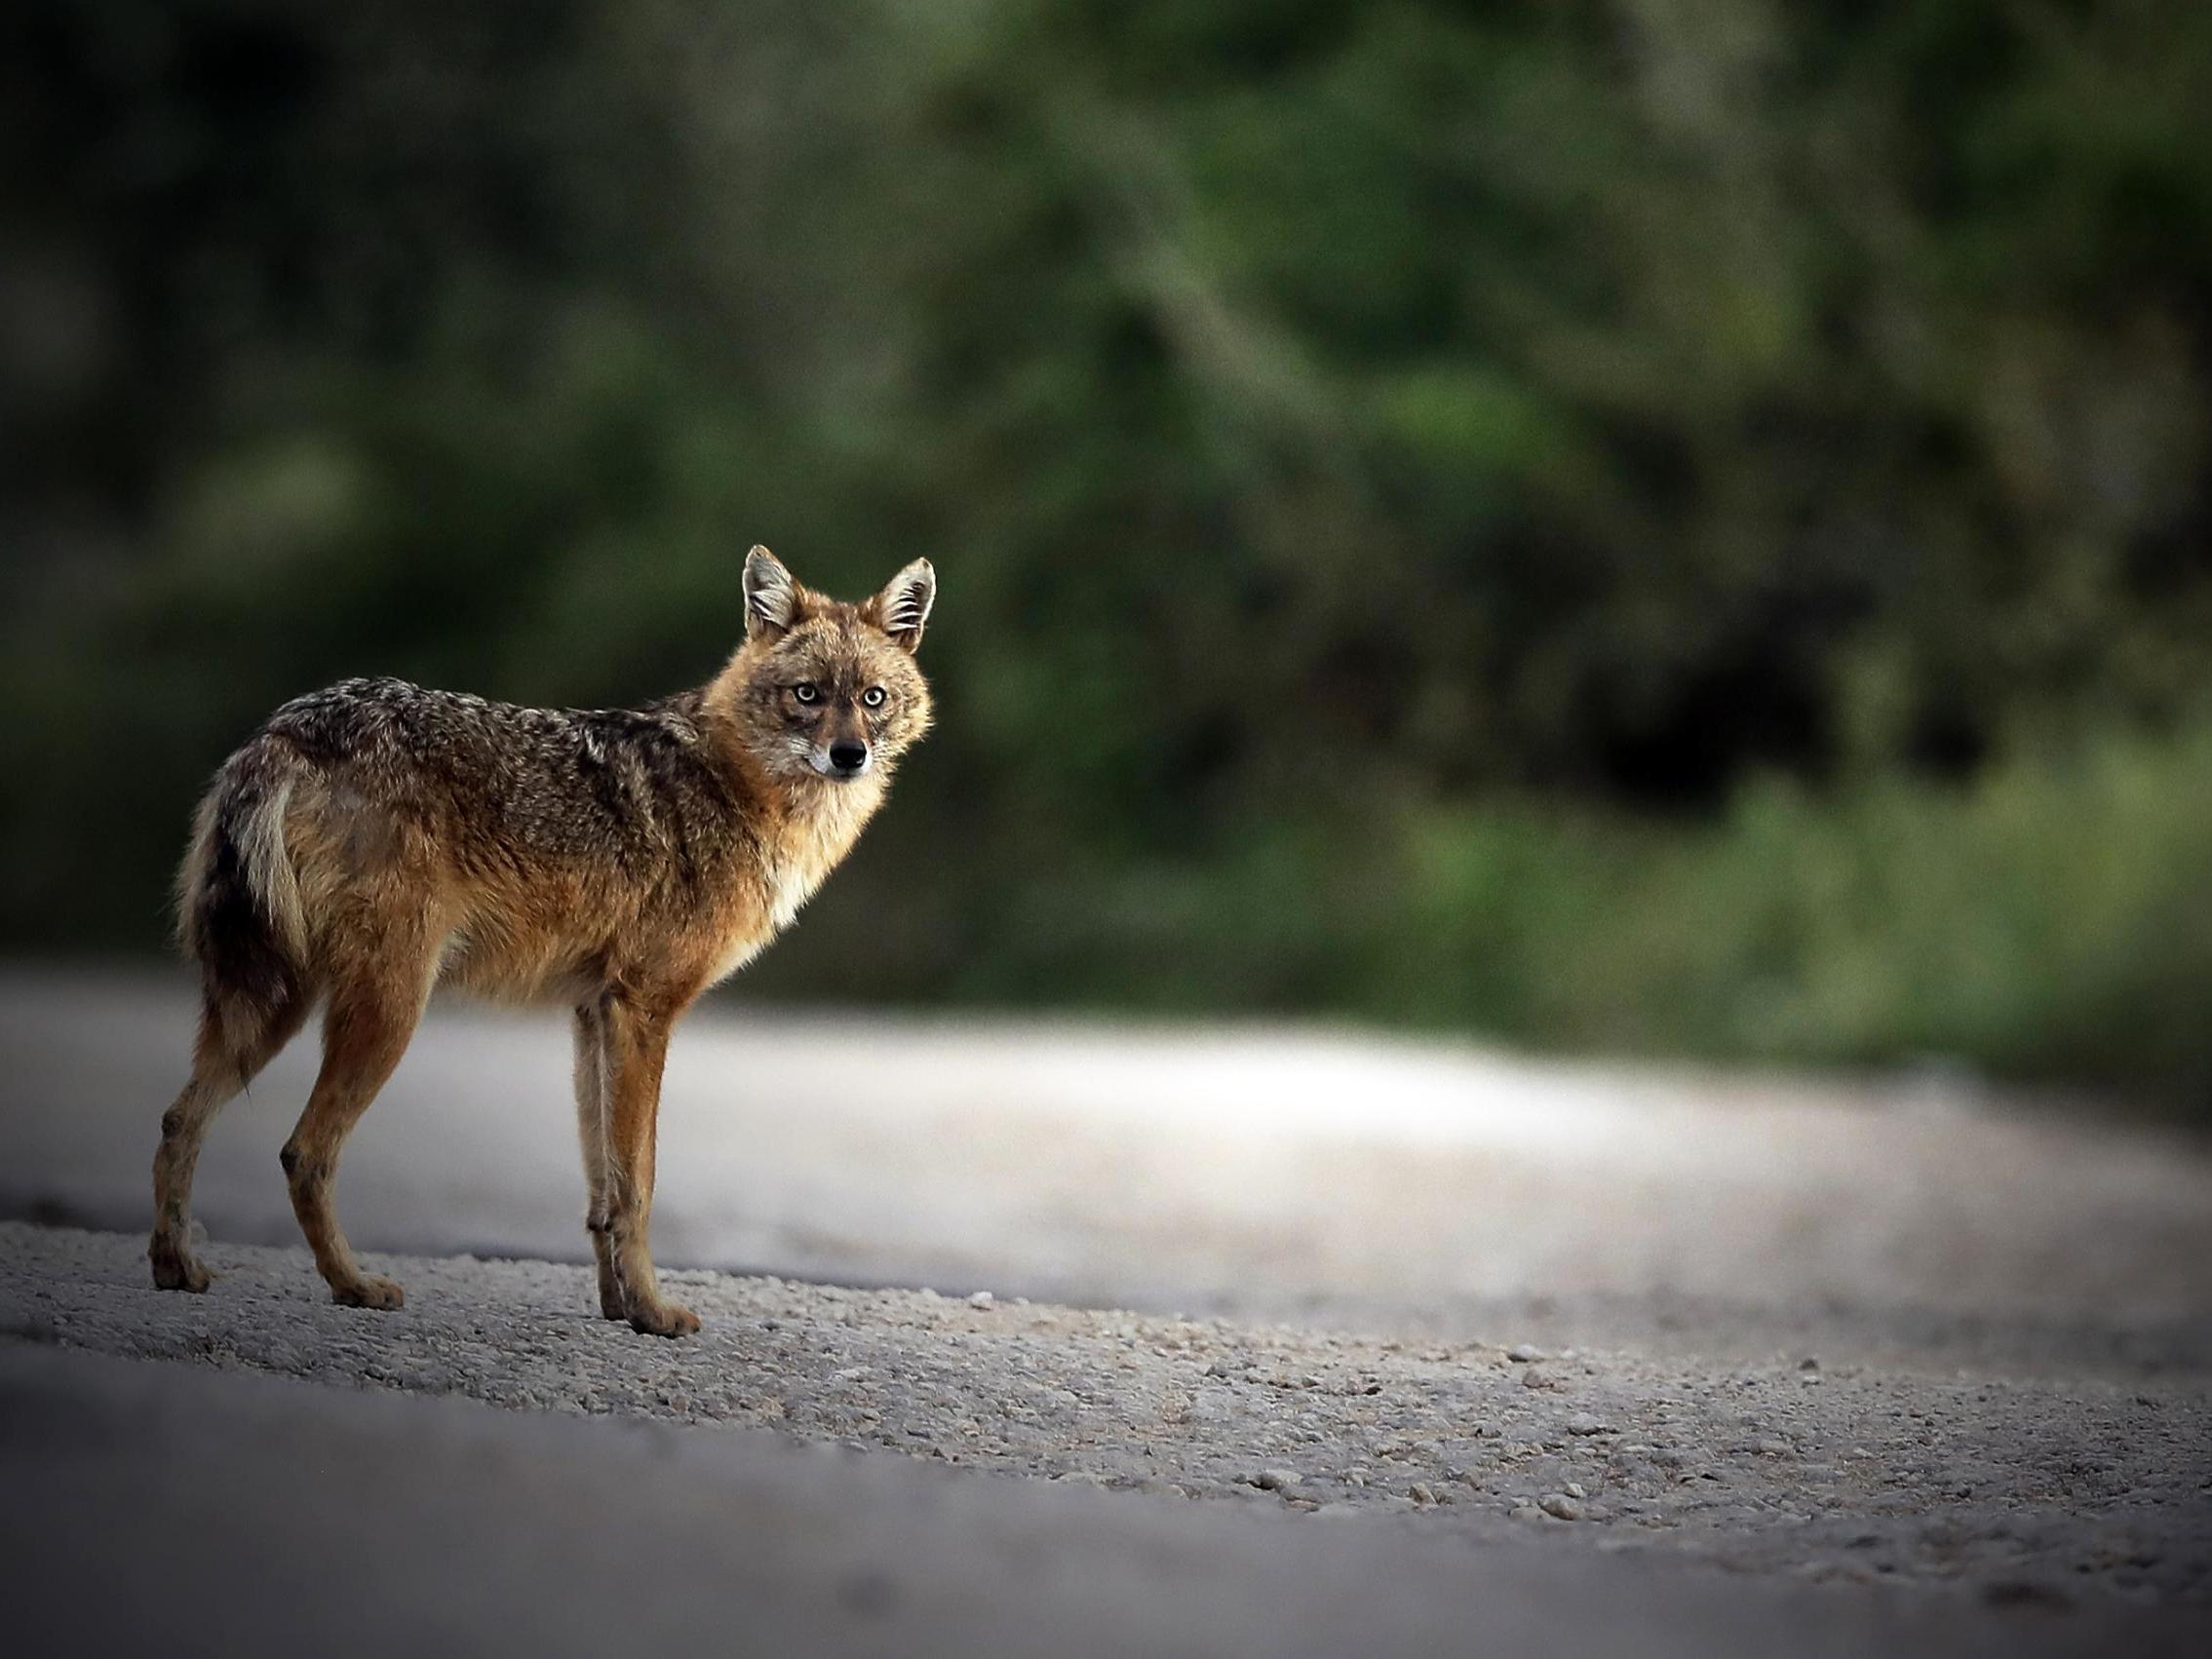 There are now over 100,000 golden jackals in Europe, as the population has boomed since the 1950s